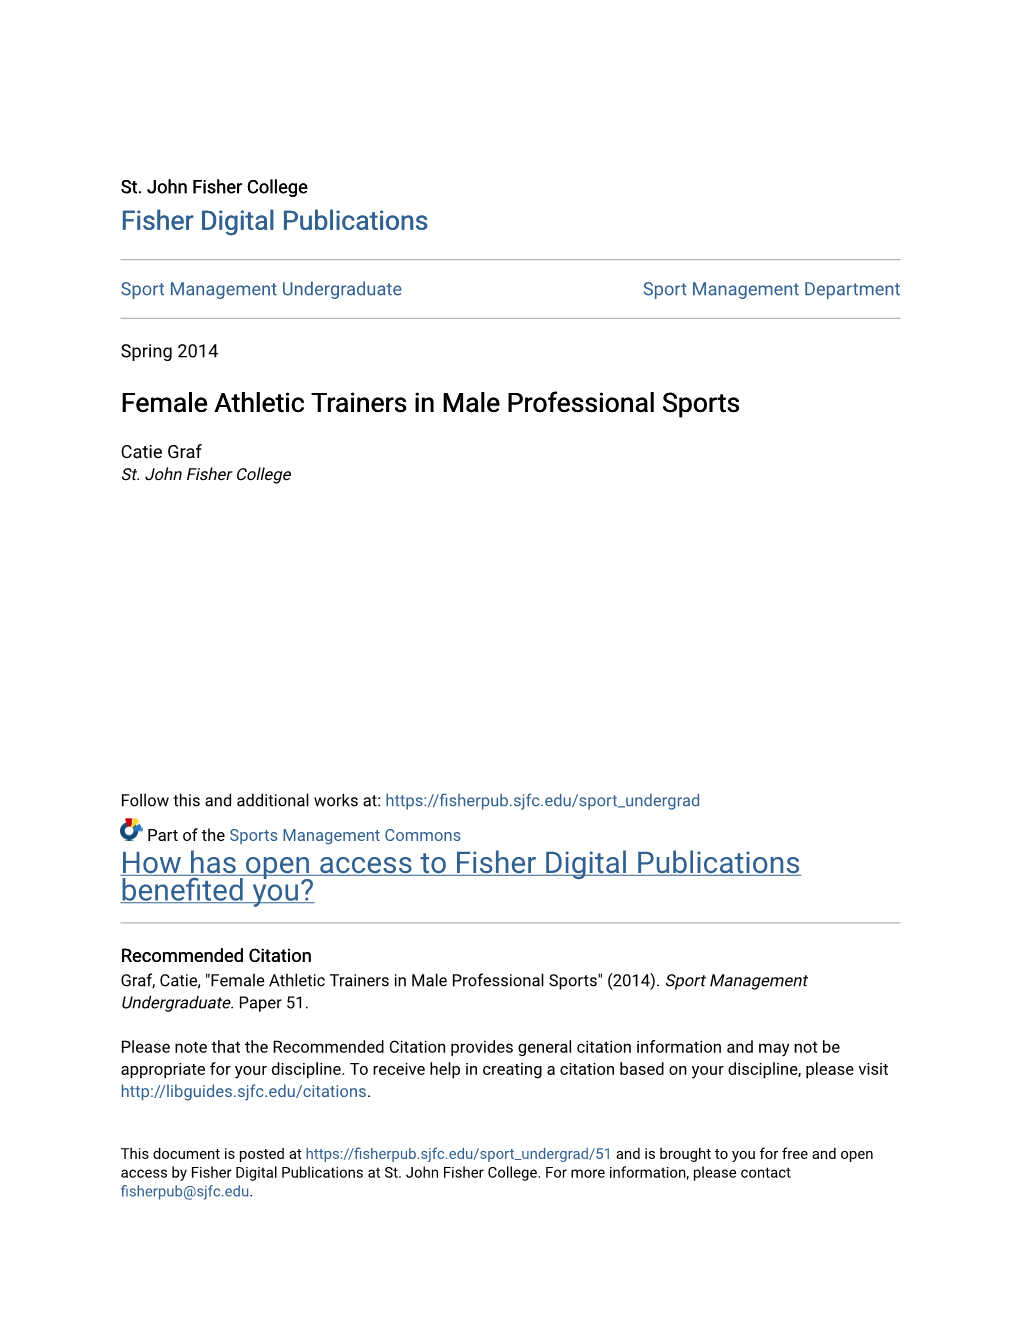 Female Athletic Trainers in Male Professional Sports